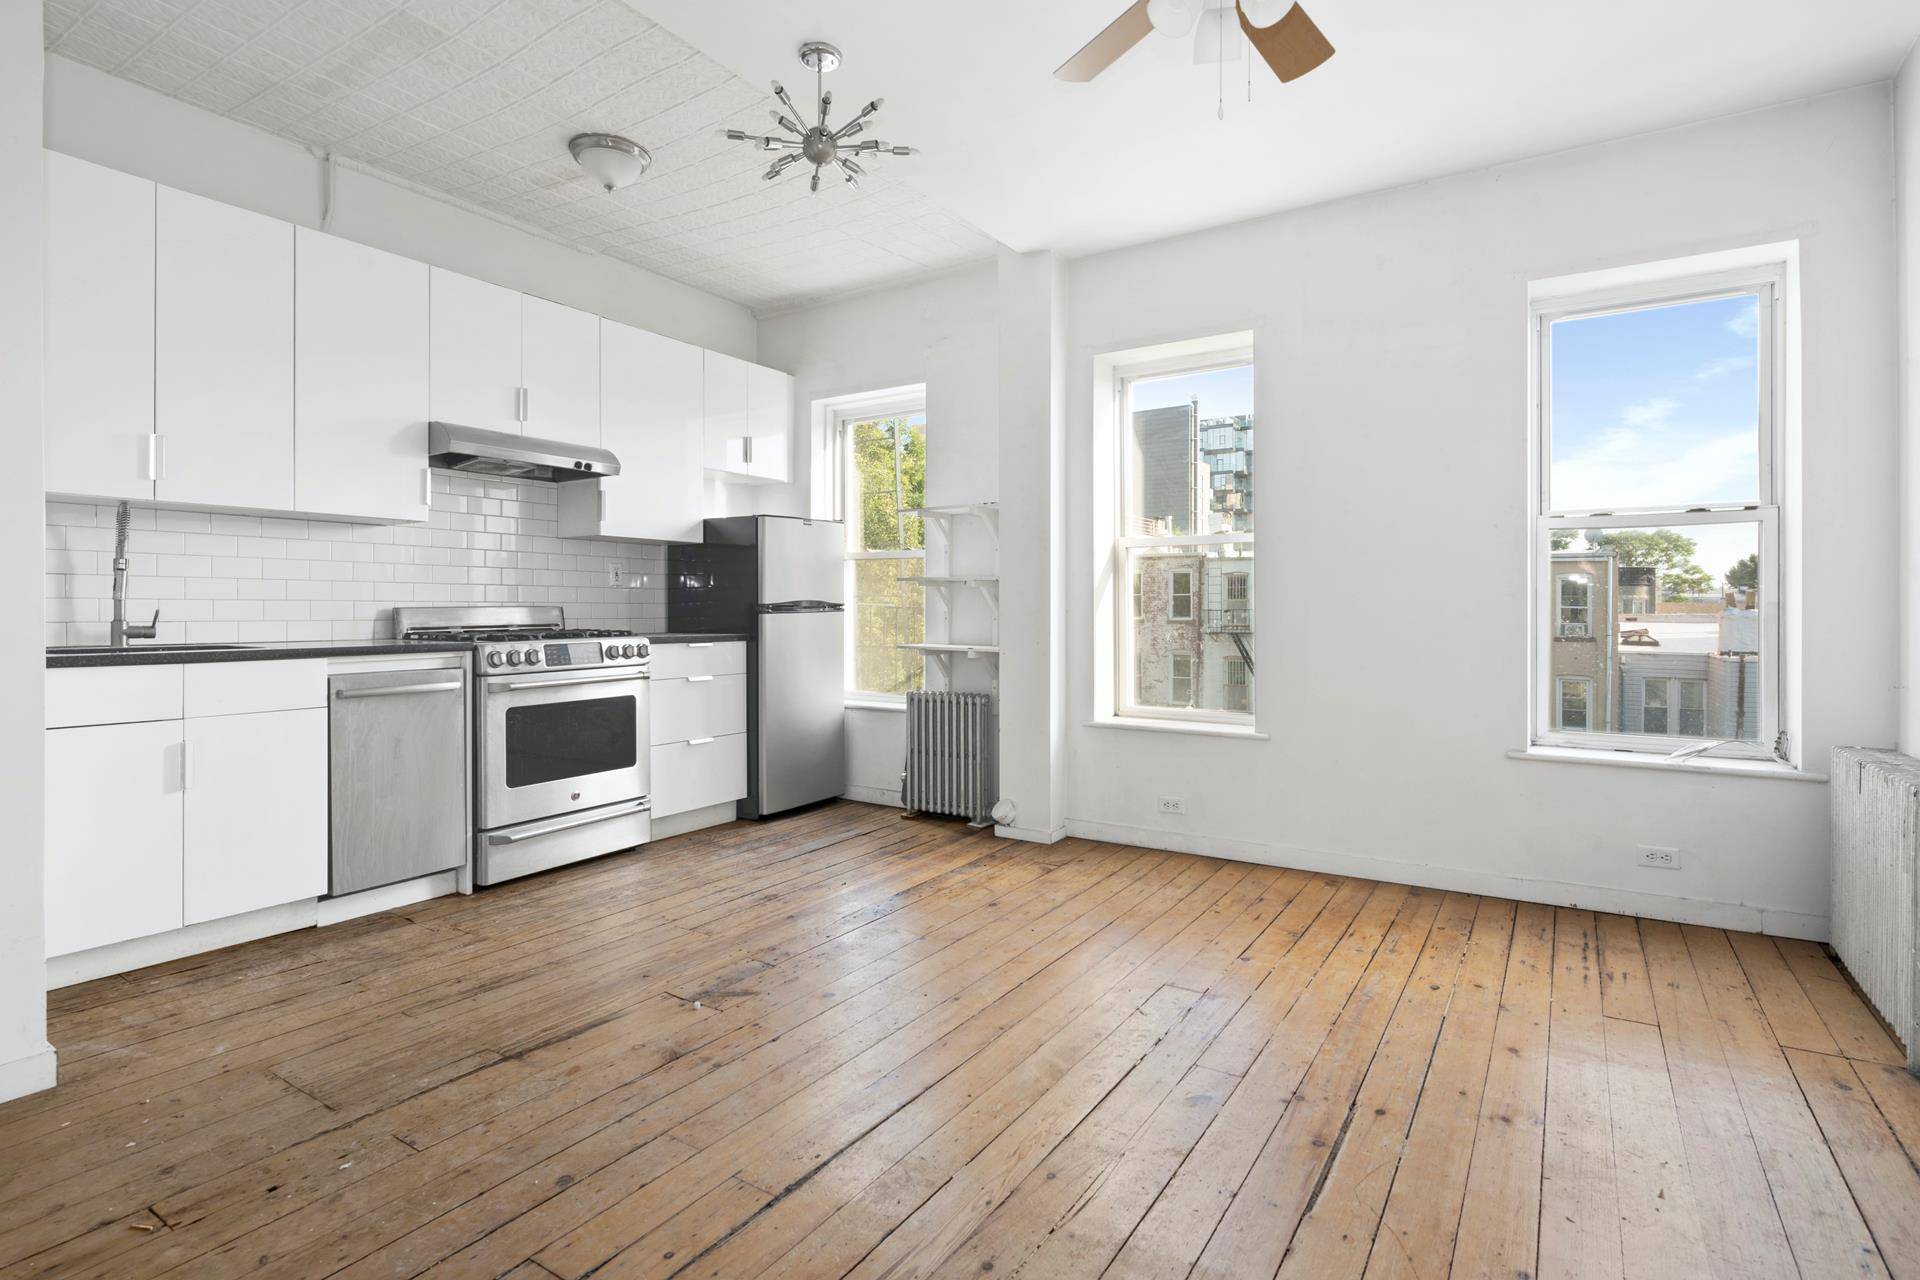 Full Video Upon Request Spacious 1 bedroom apartment located in the heart of Gowanus !